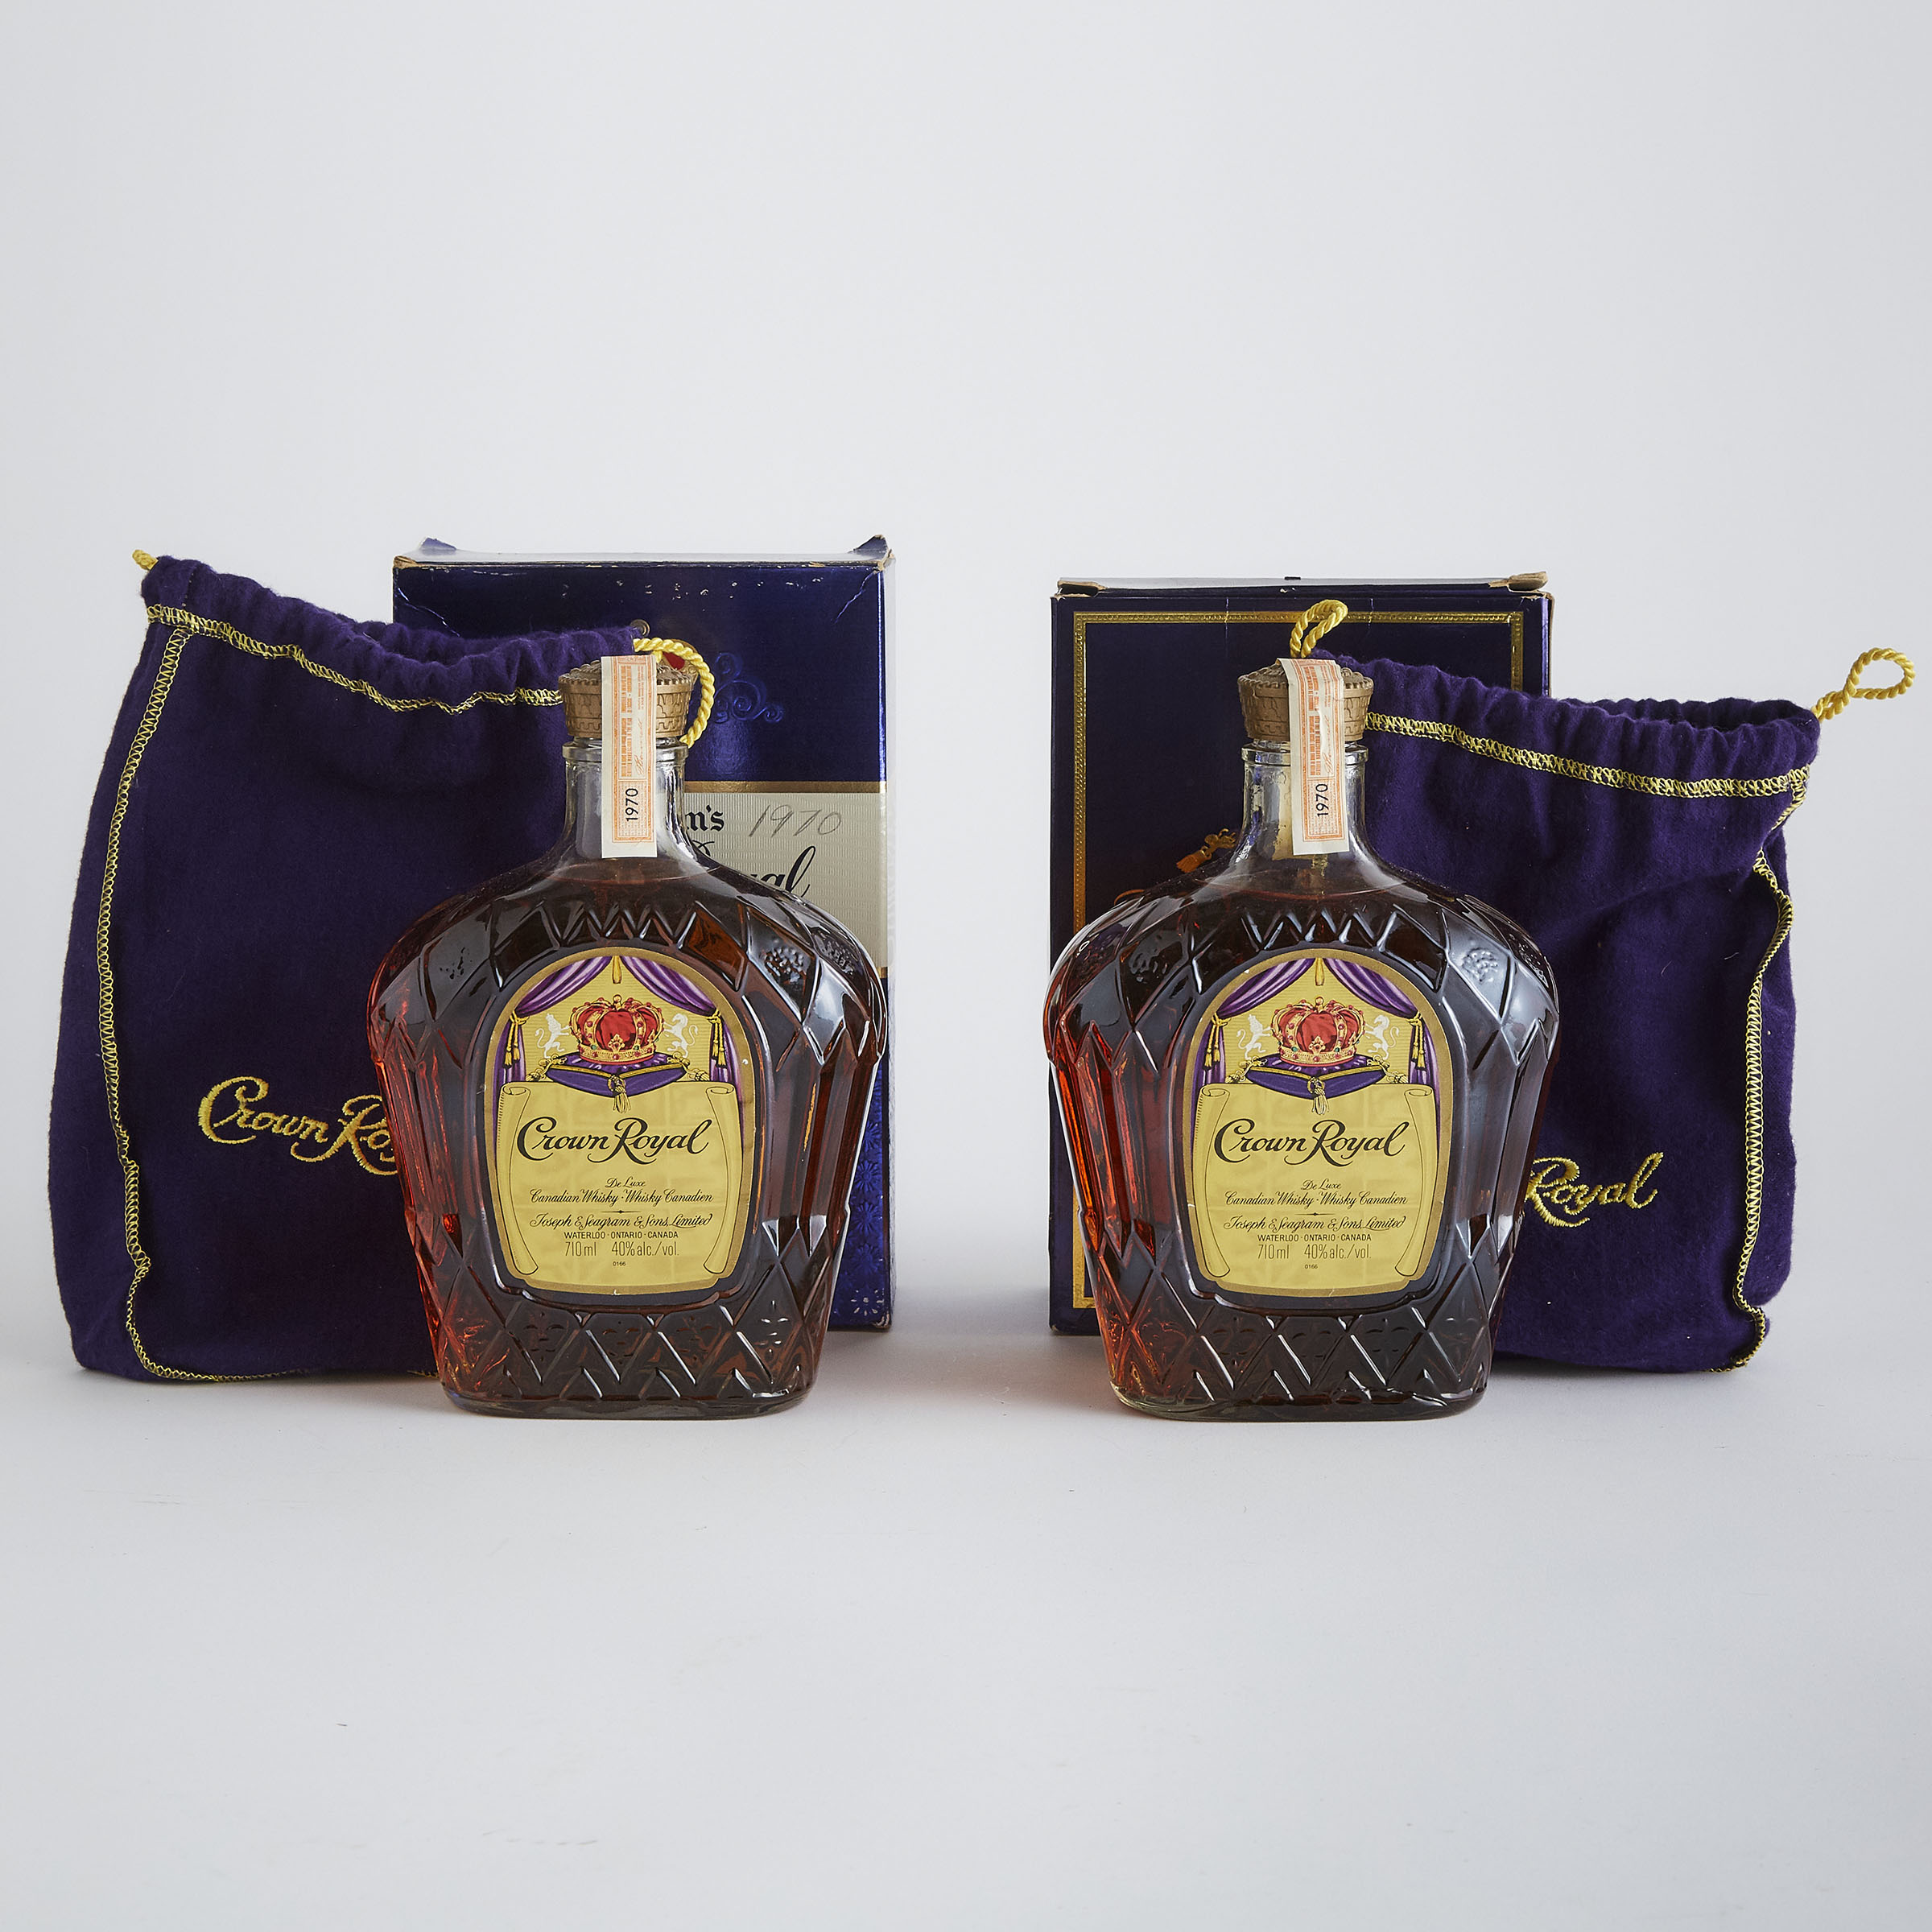 CROWN ROYAL DELUXE CANADIAN WHISKY (ONE 710 ML)
CROWN ROYAL DELUXE CANADIAN WHISKY (ONE 710 ML)